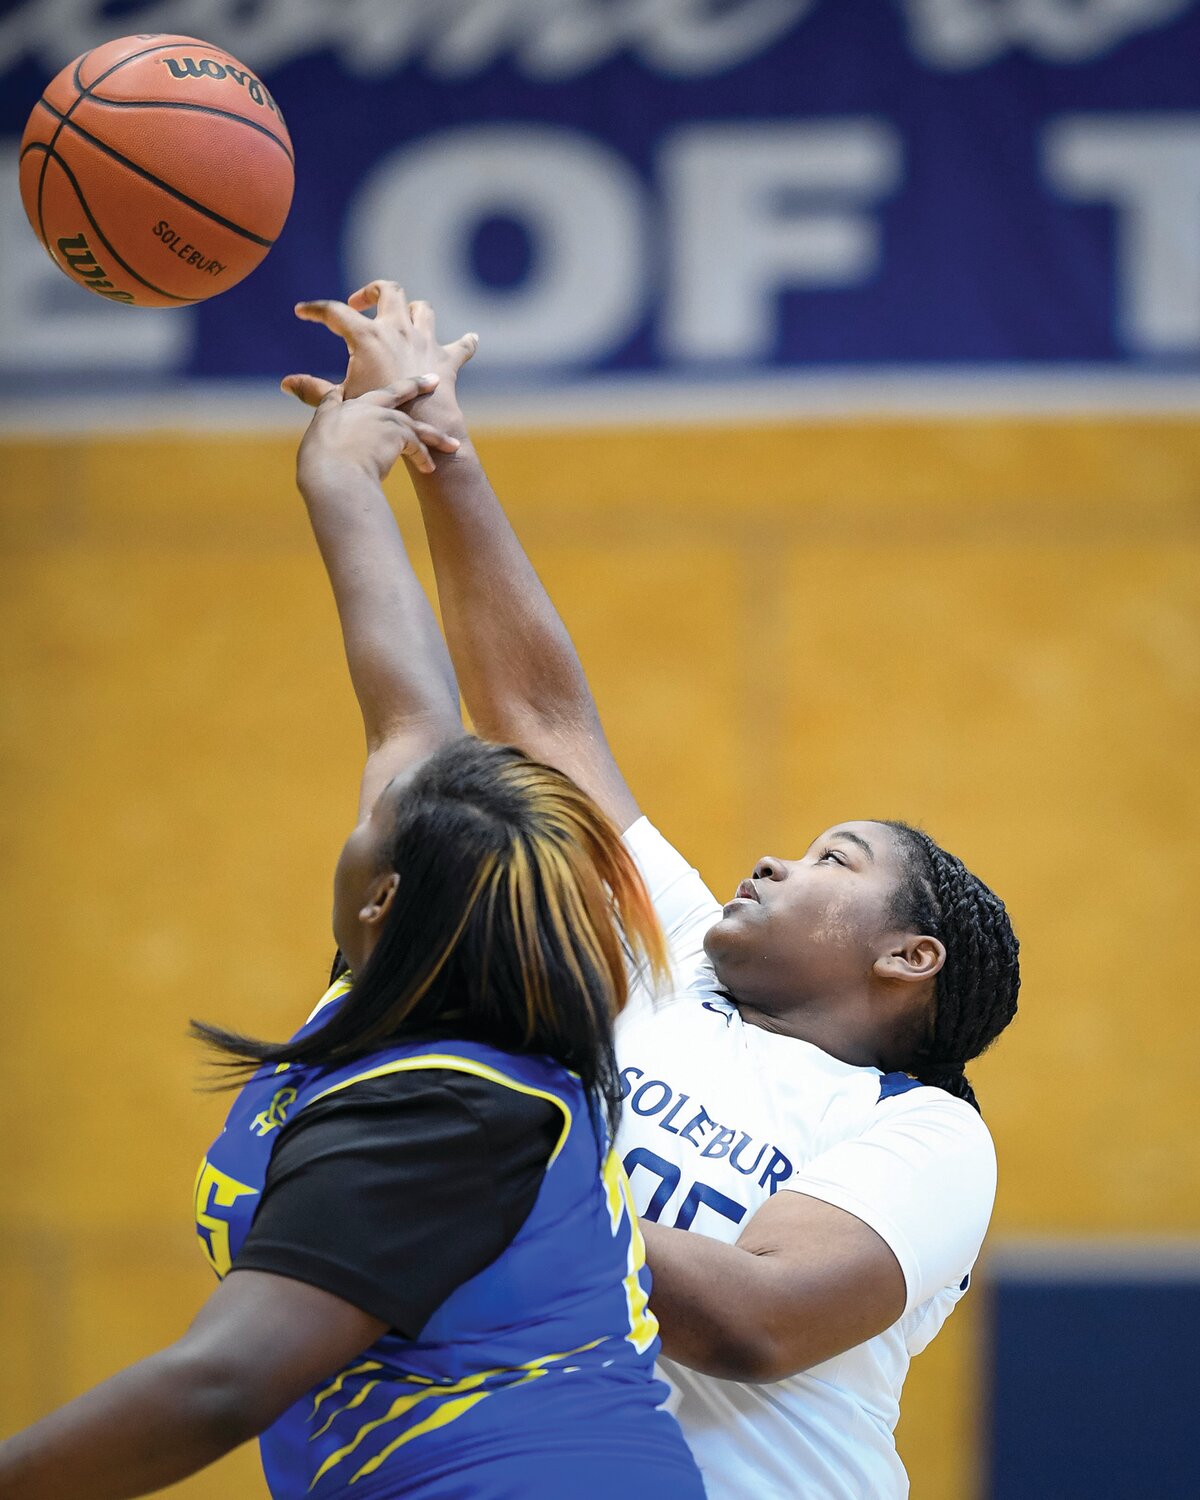 Solebury School’s Autumn Turner and The City School’s Maiya Porter during the opening tipoff.